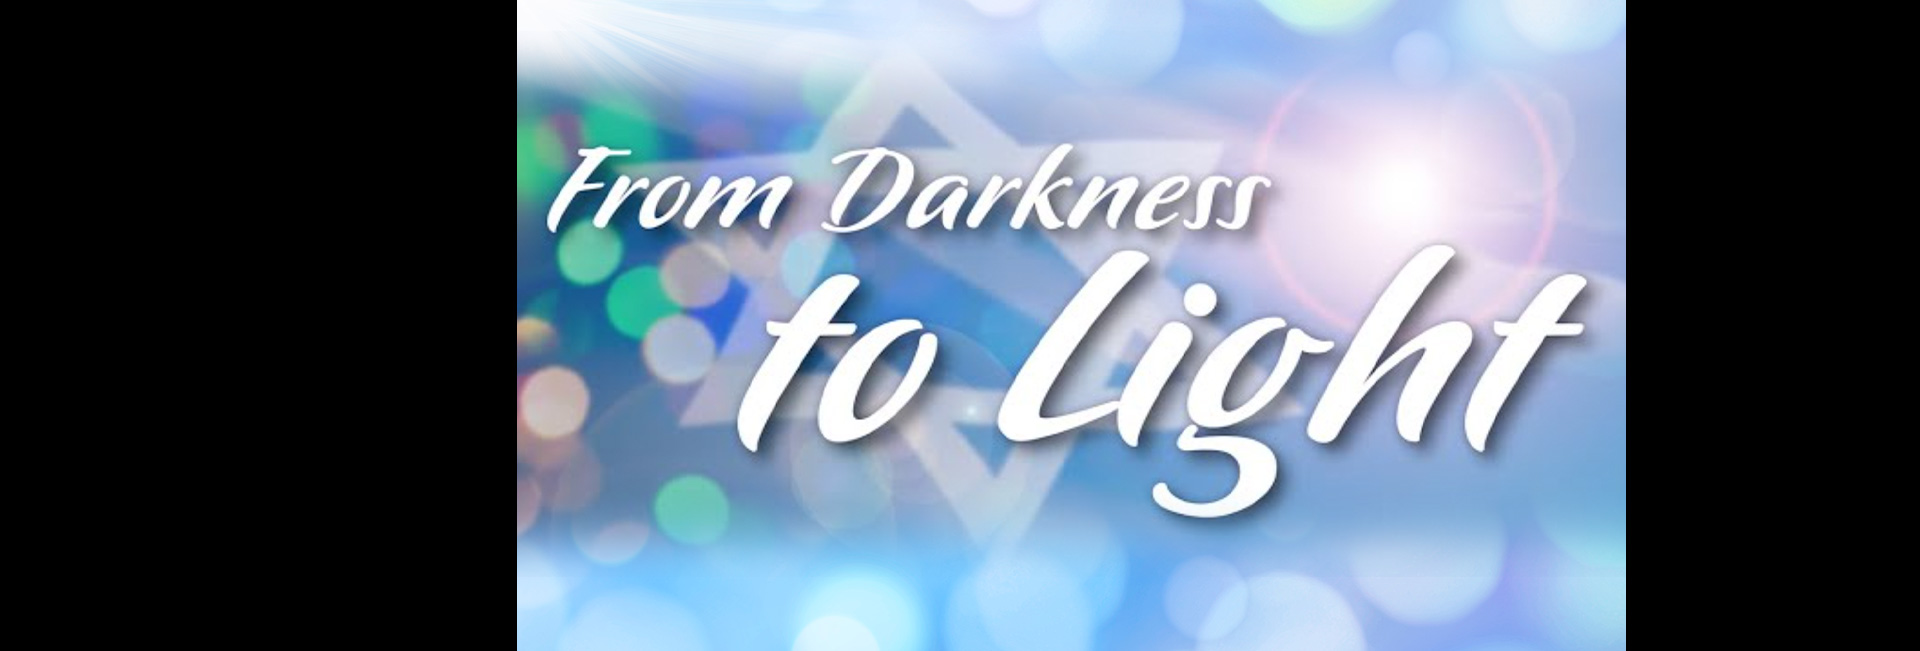 From Darkness to Light: An Evening to Commemorate and Celebrate Israel